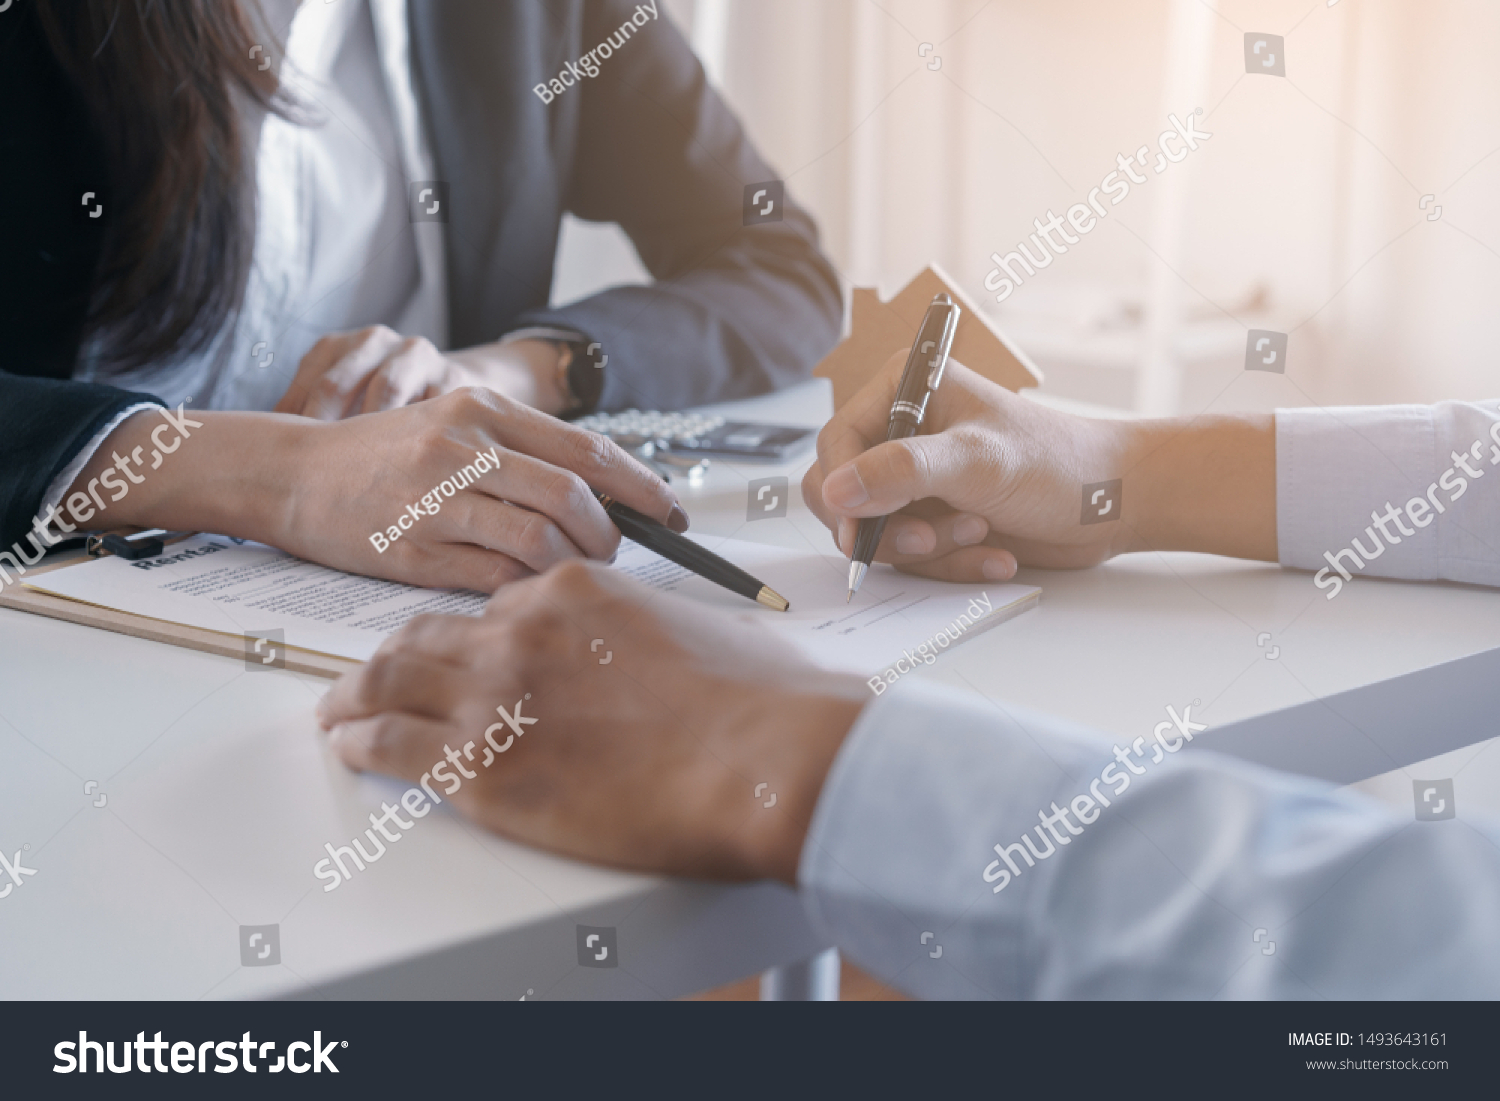 Salesmen are letting the male customers sign the sales contract, Asian women and men are doing business in the office, Business concept and contract signing